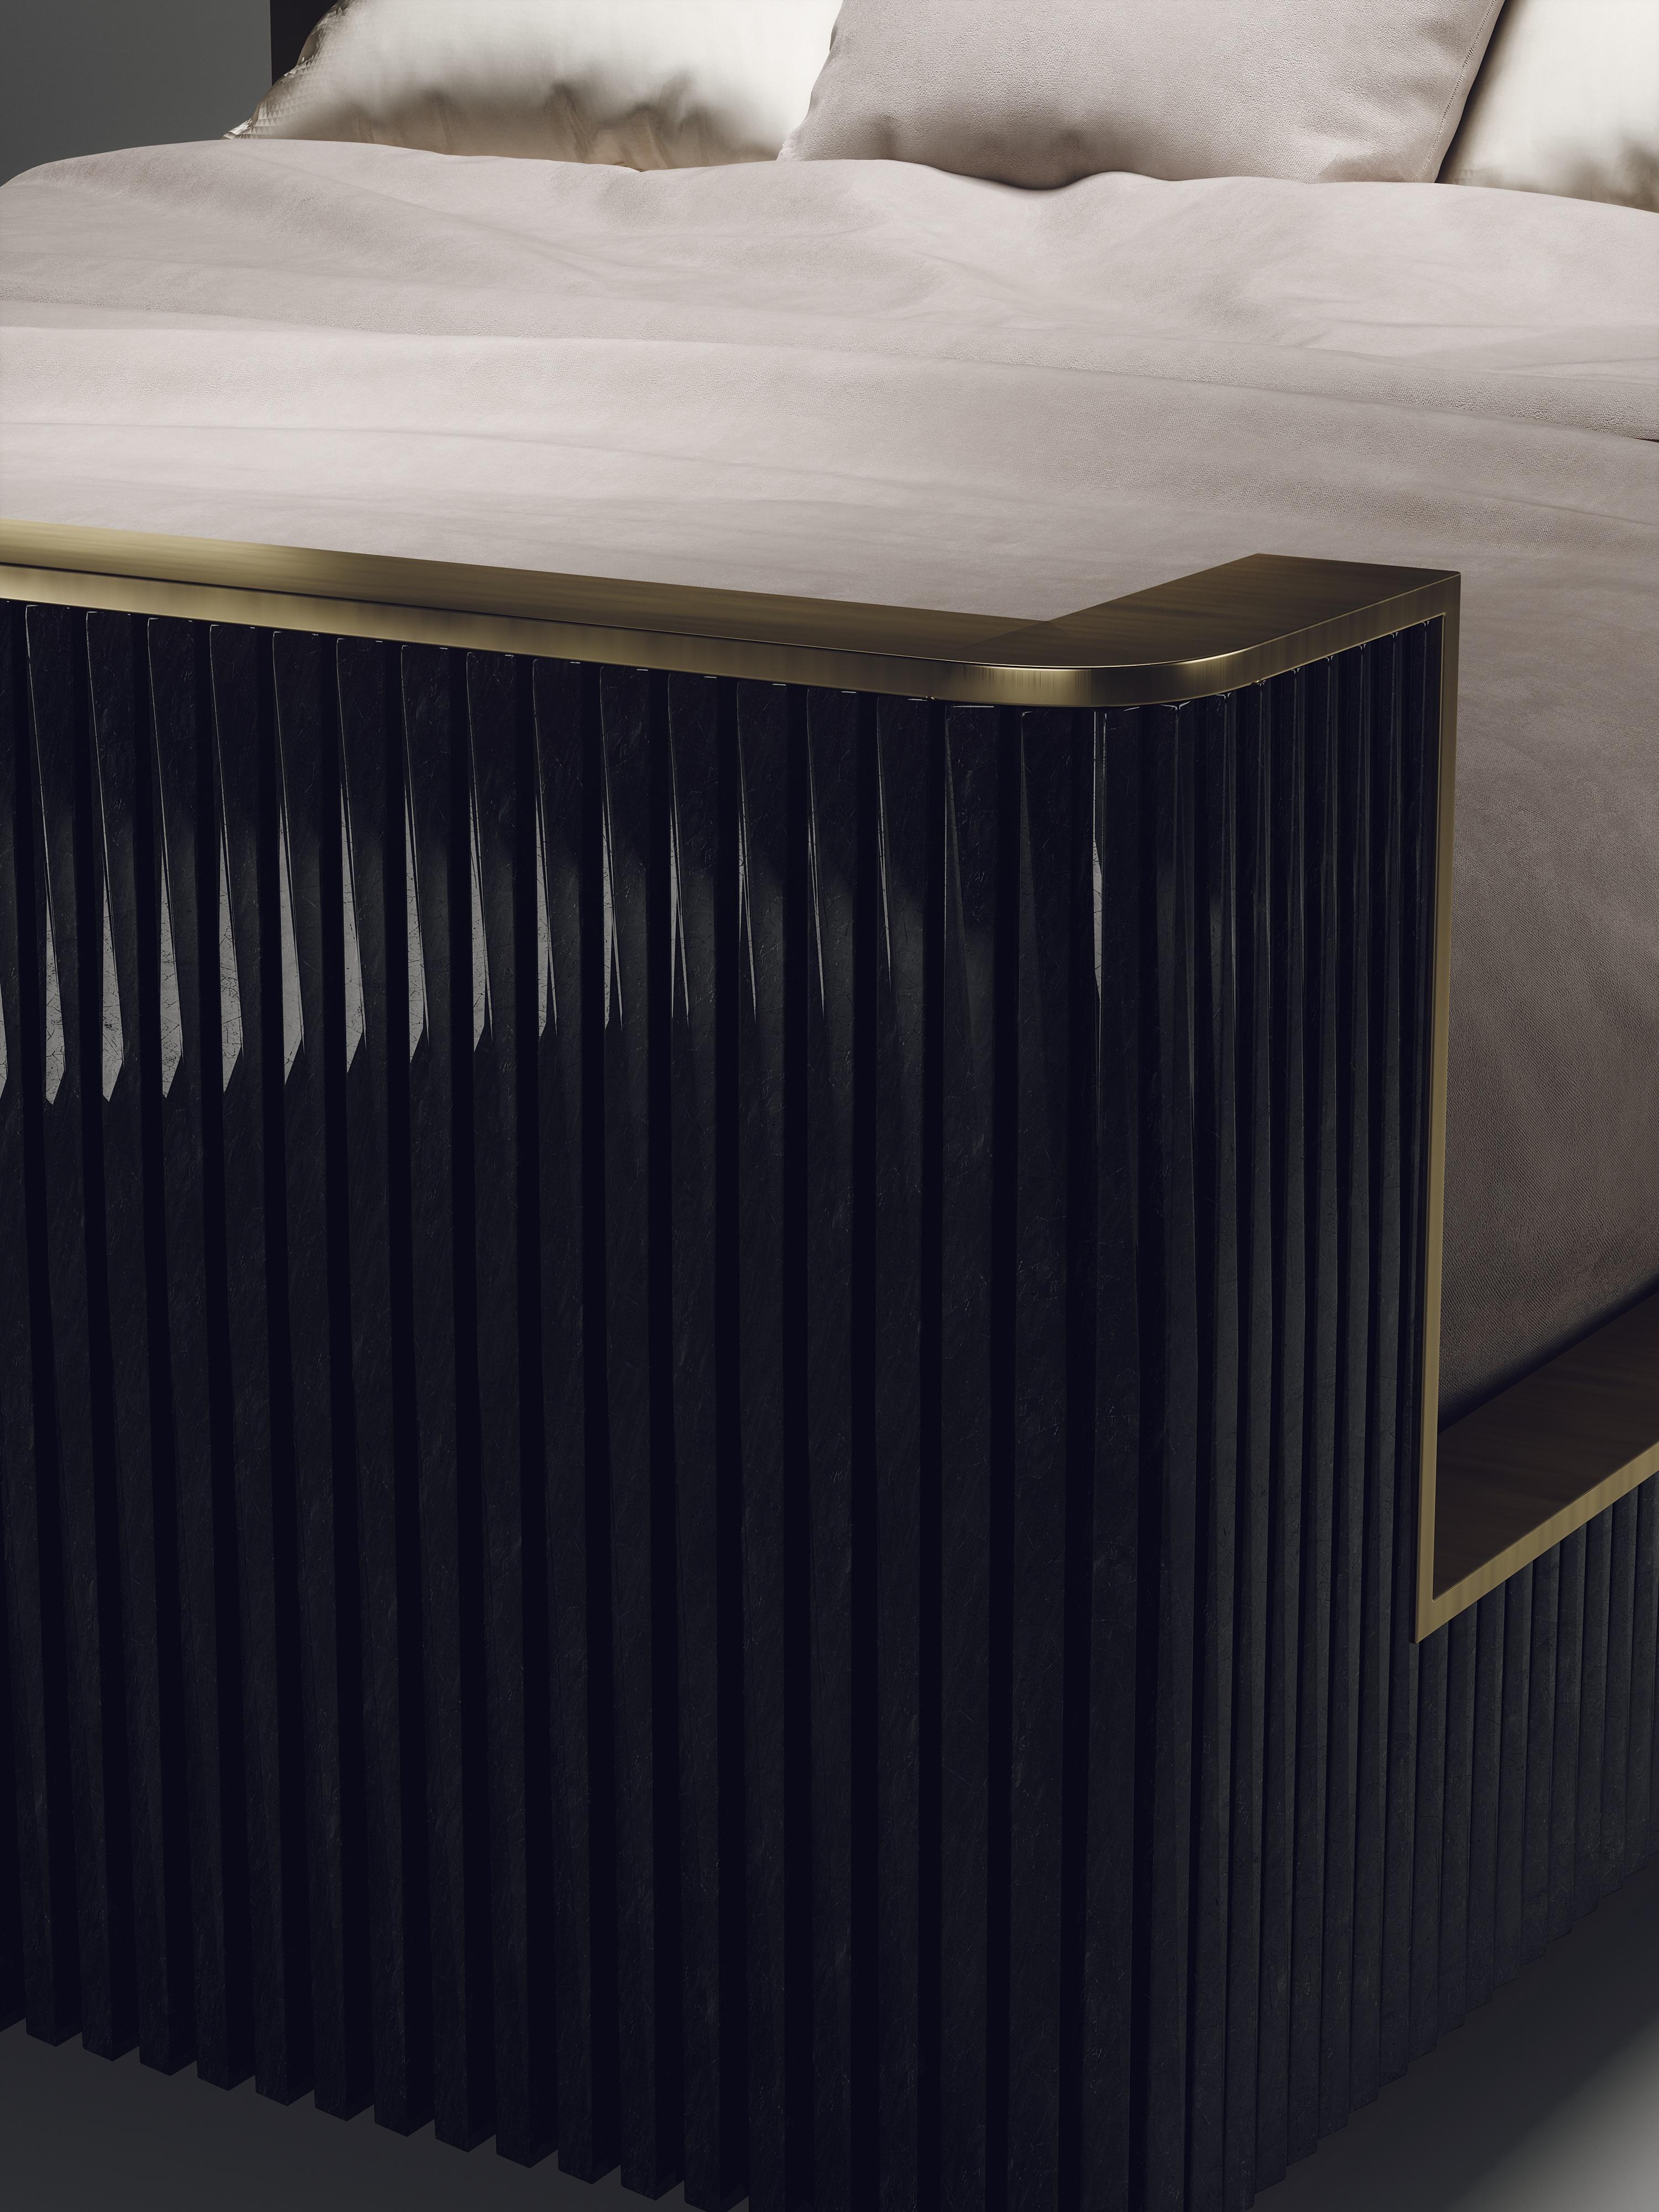 The Fluted bed in black pen shell and bronze-patina brass by R&Y Augousti is a one of a kind piece. This modern and elegant design creates a subtle art deco statement for any bedroom. The inlay and artisanal hand-work on this piece shows the